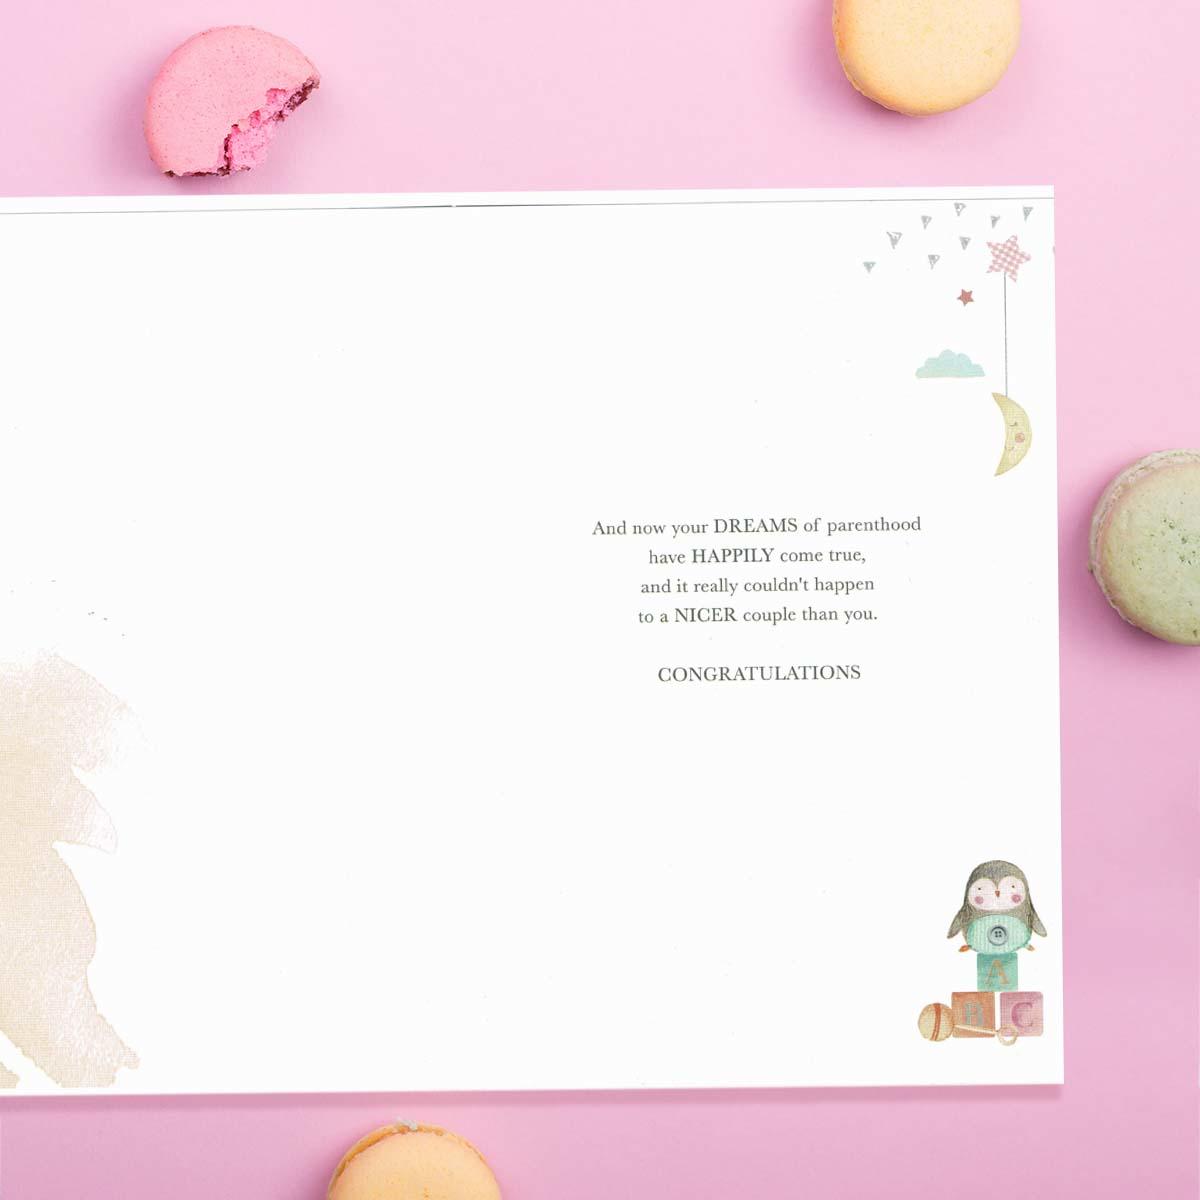 Inside Of Baby Girl Birth Card Showing Inside Image And Printed Insert